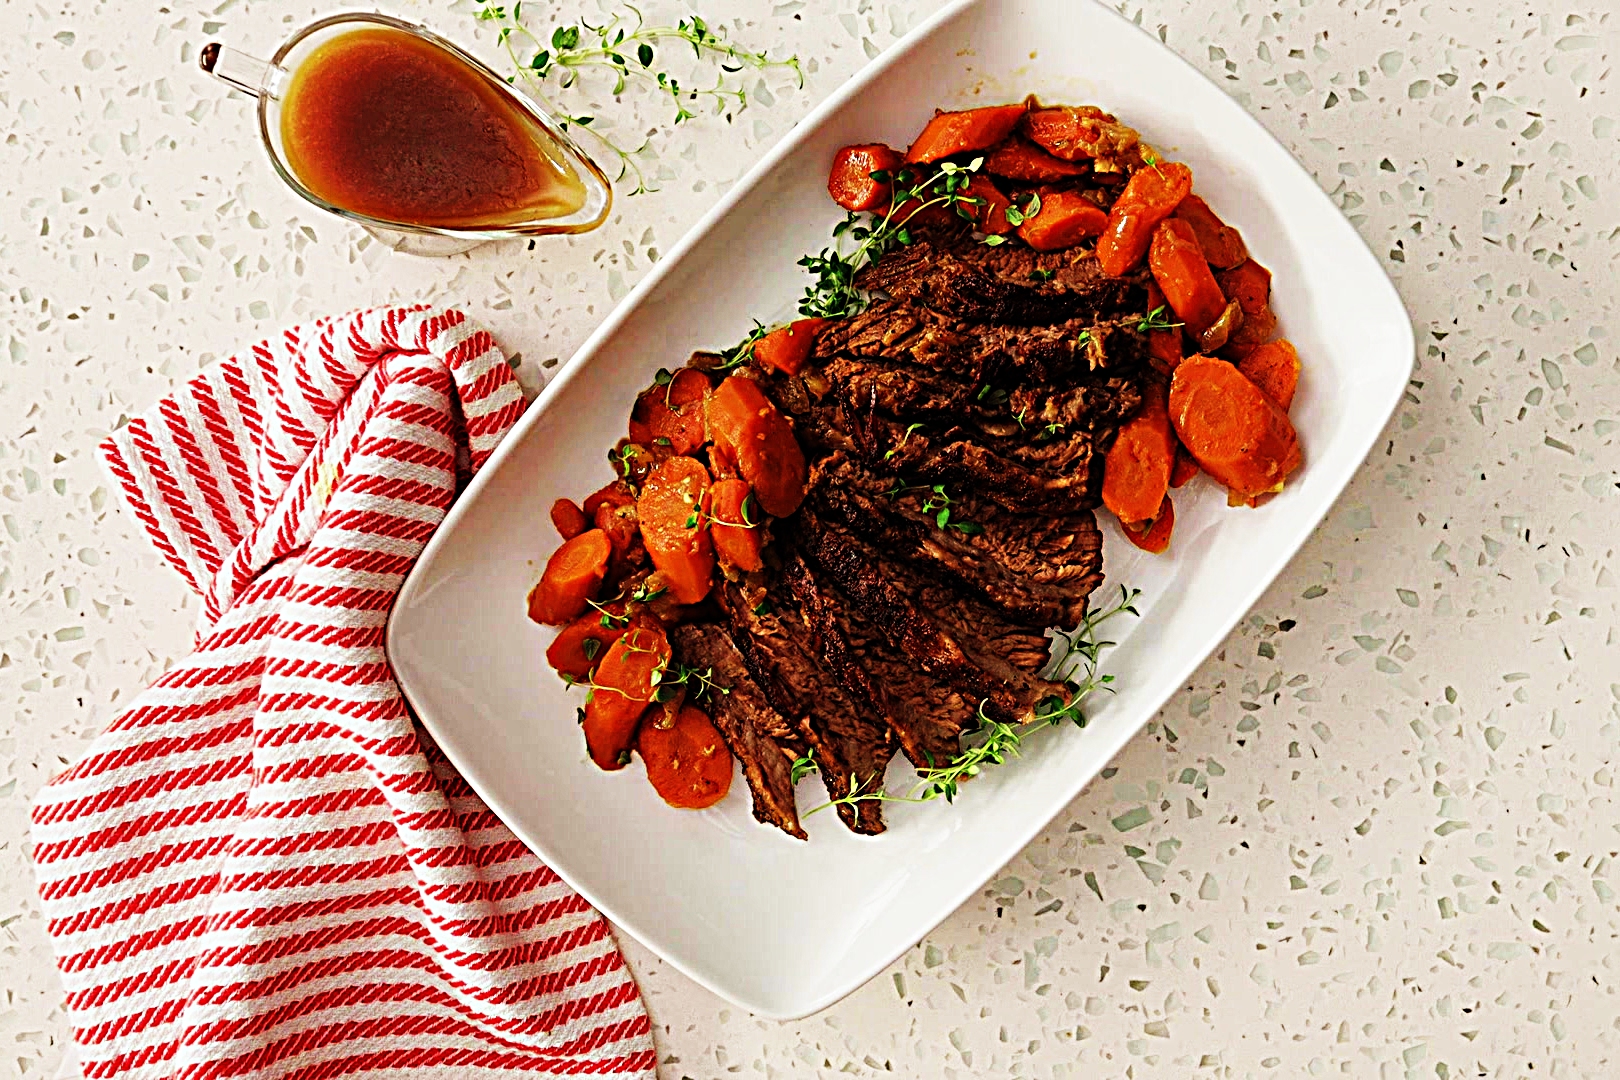 Stupid-Easy Recipe for Oven-Braised Beef Brisket (#1 Top-Rated)